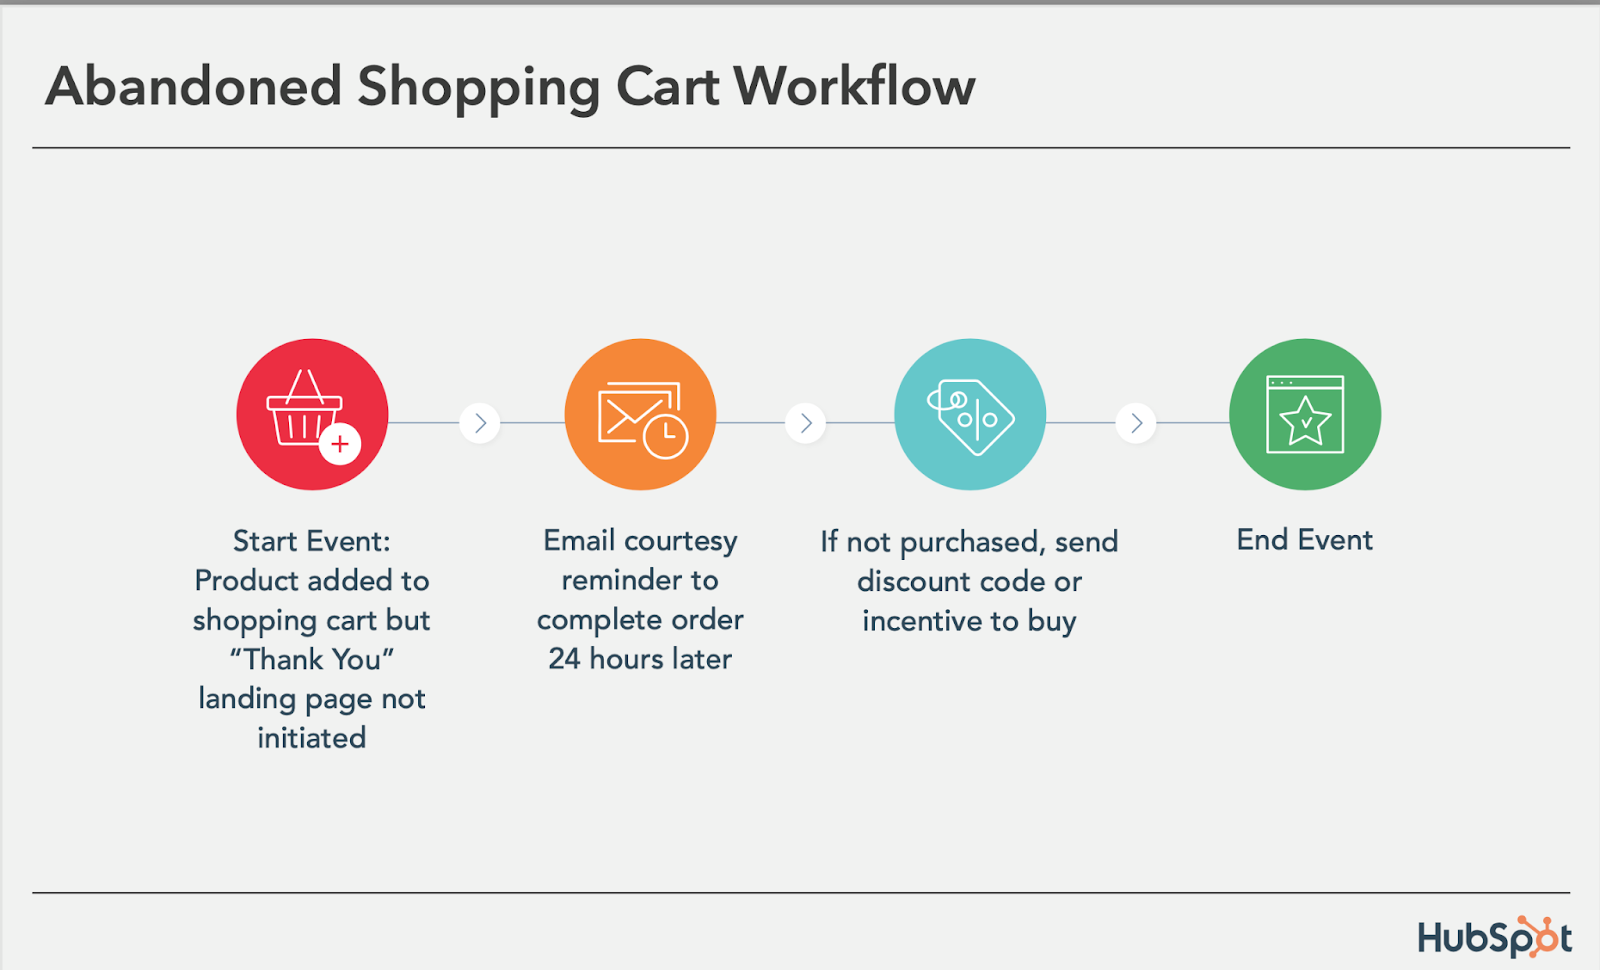 abdandoned shopping cart workflow